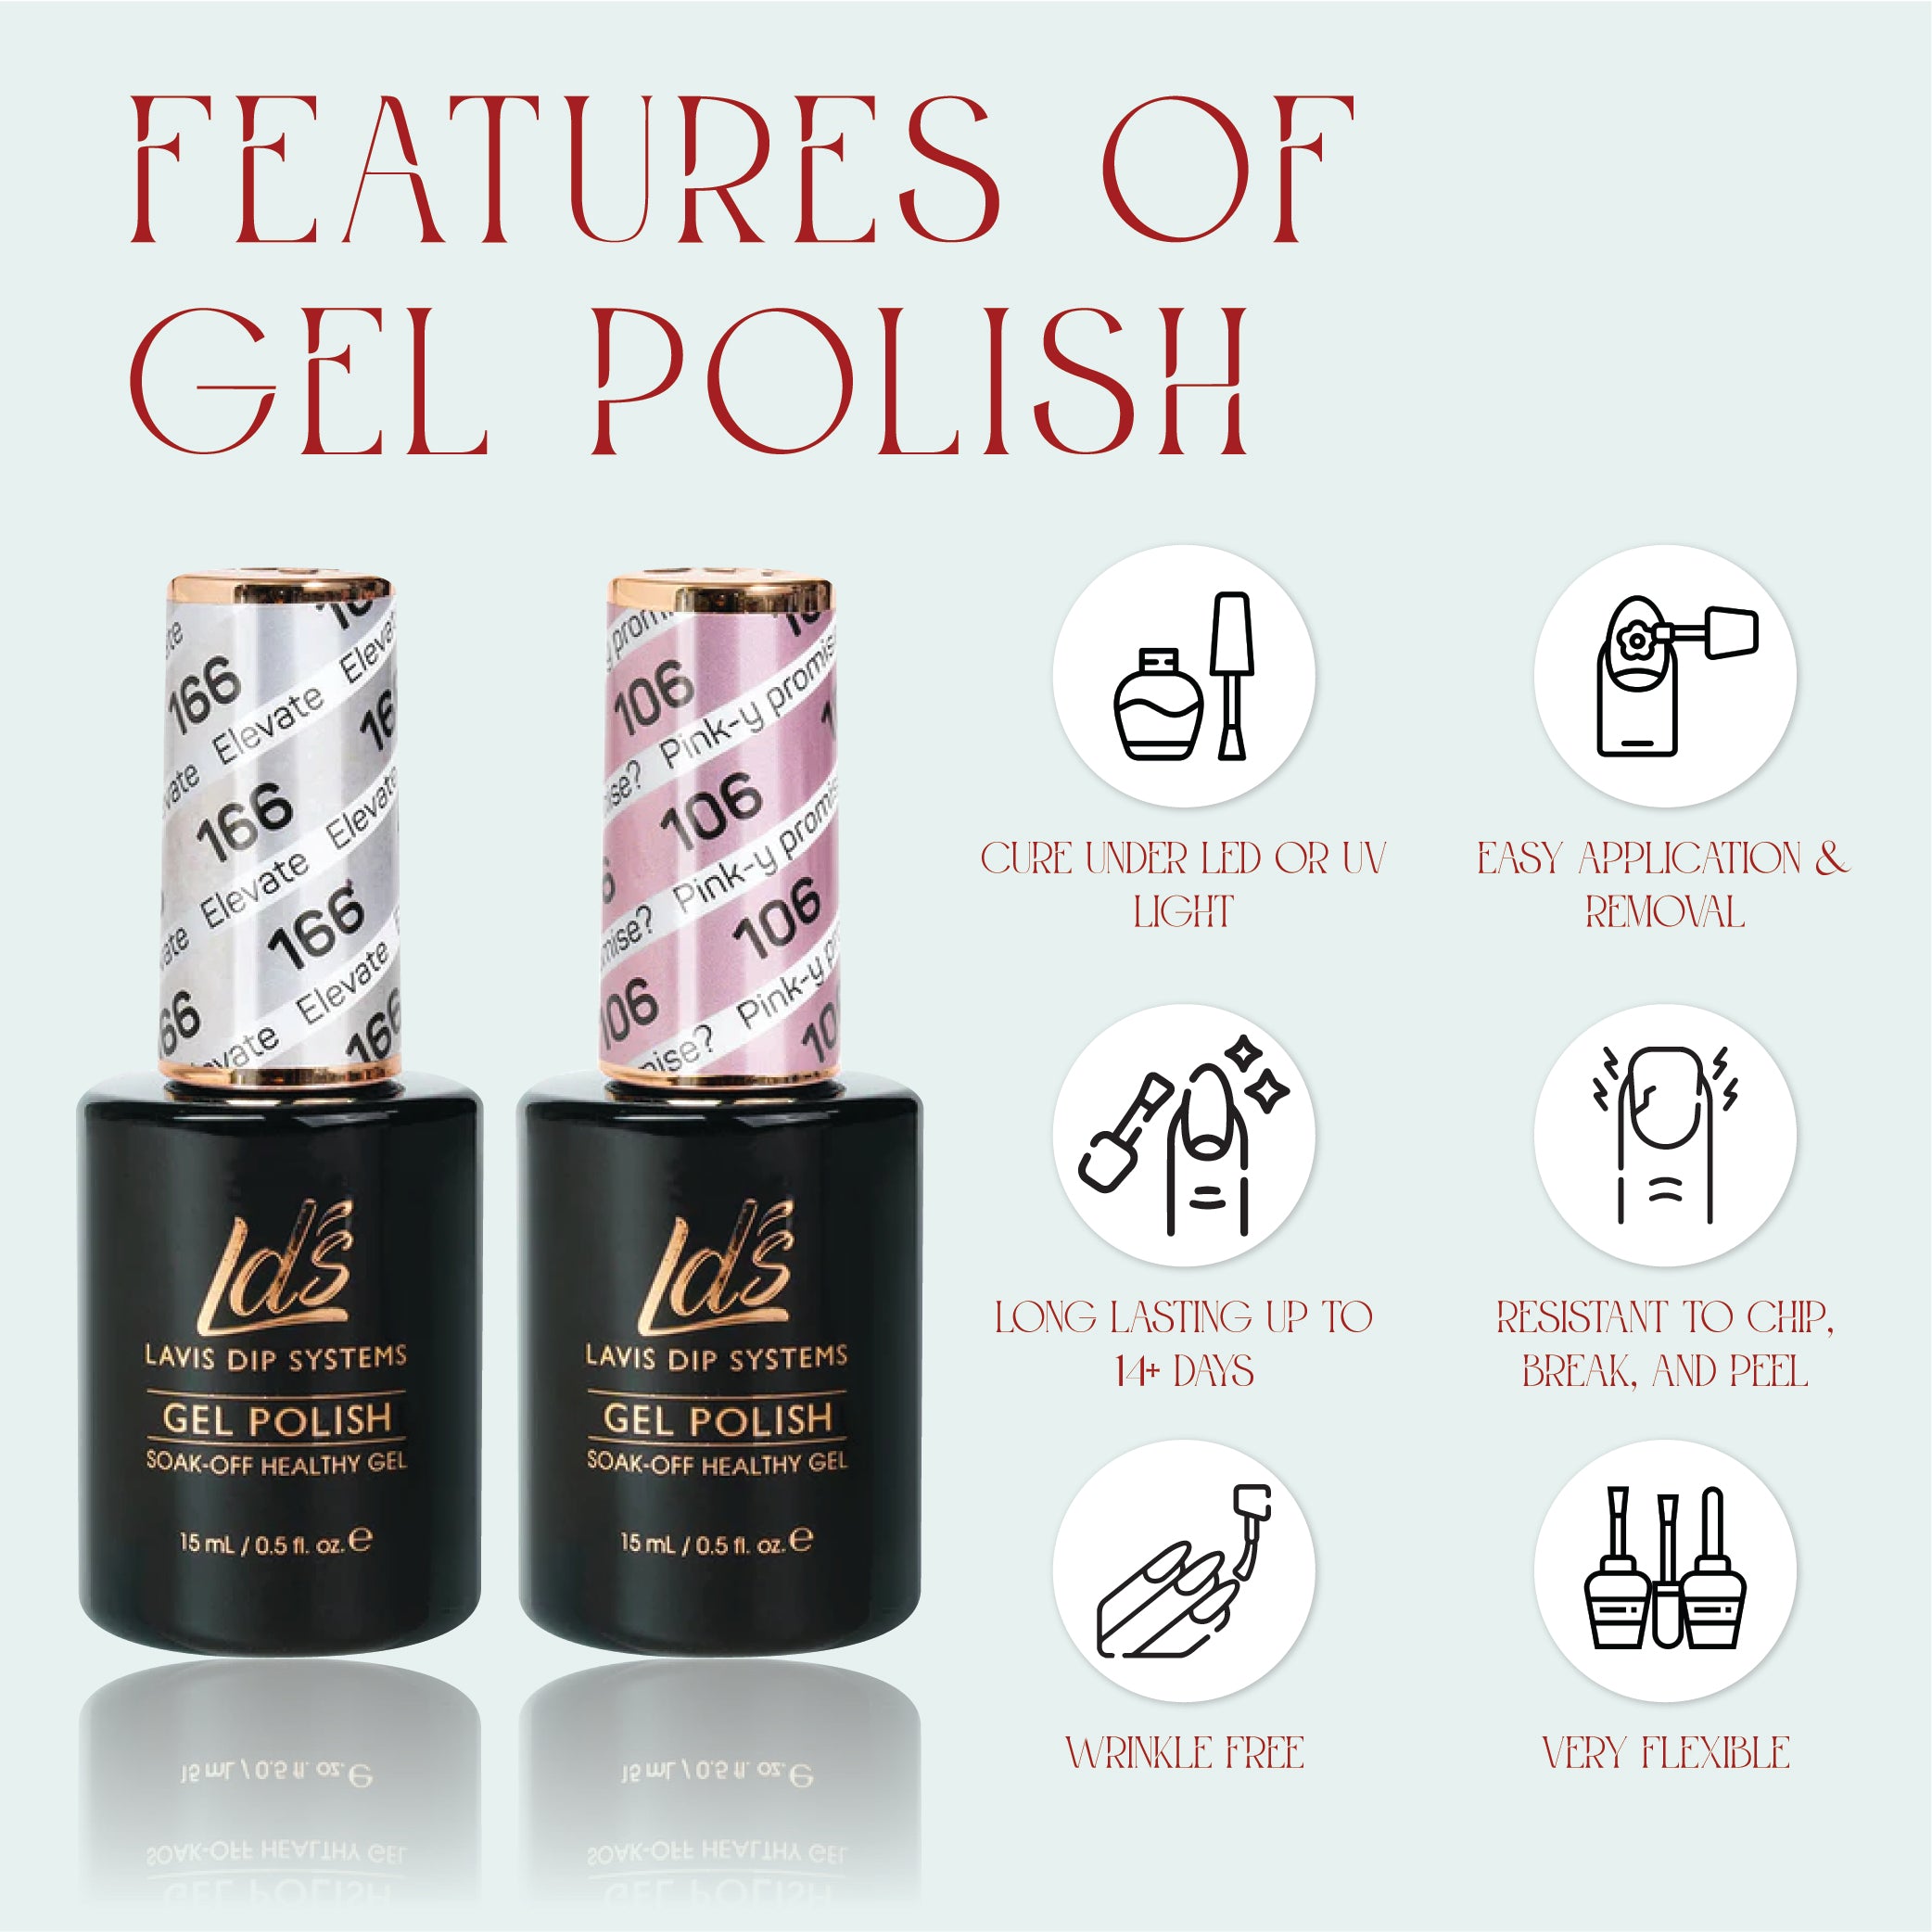 LDS 089 Be Fierce - LDS Healthy Gel Polish & Matching Nail Lacquer Duo Set - 0.5oz